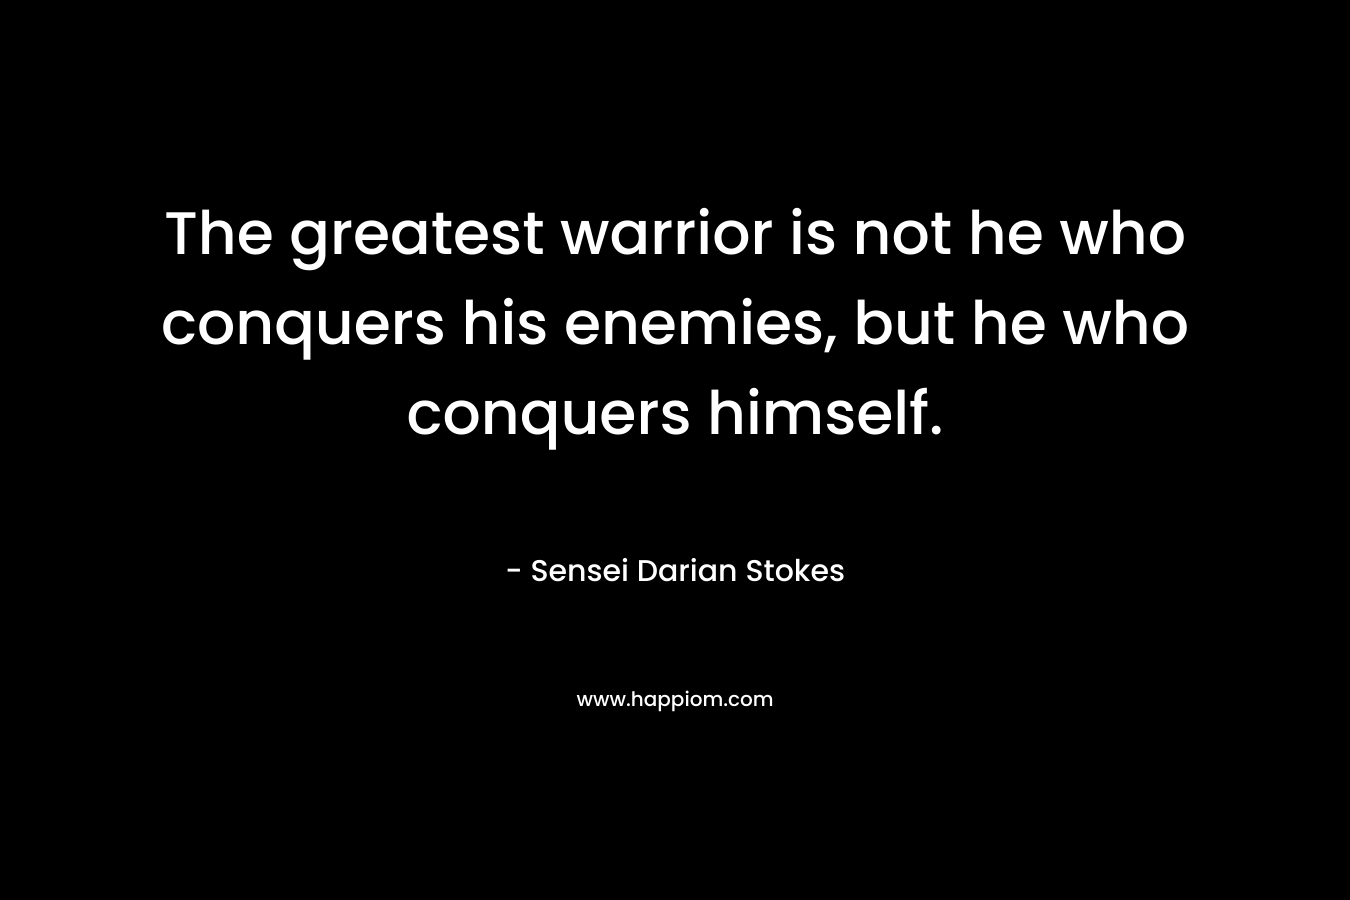 The greatest warrior is not he who conquers his enemies, but he who conquers himself. – Sensei Darian Stokes